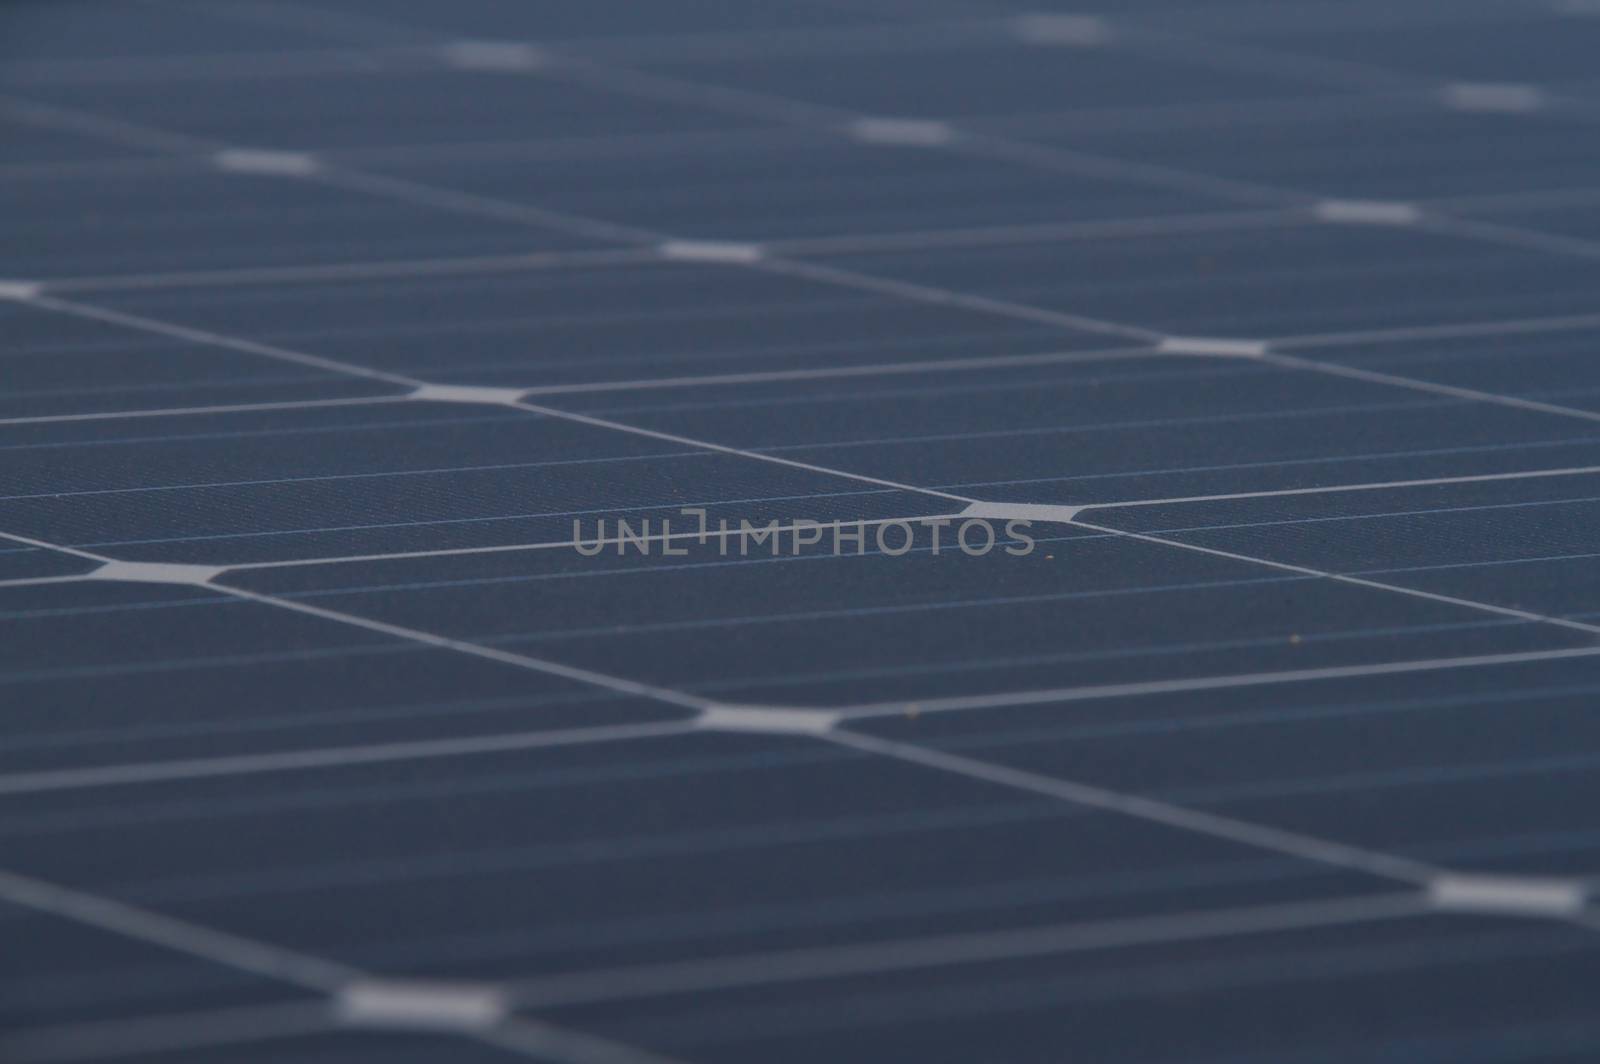 Low angle photo of the surface of a solar panel that produces electricity directly from the sunlight.